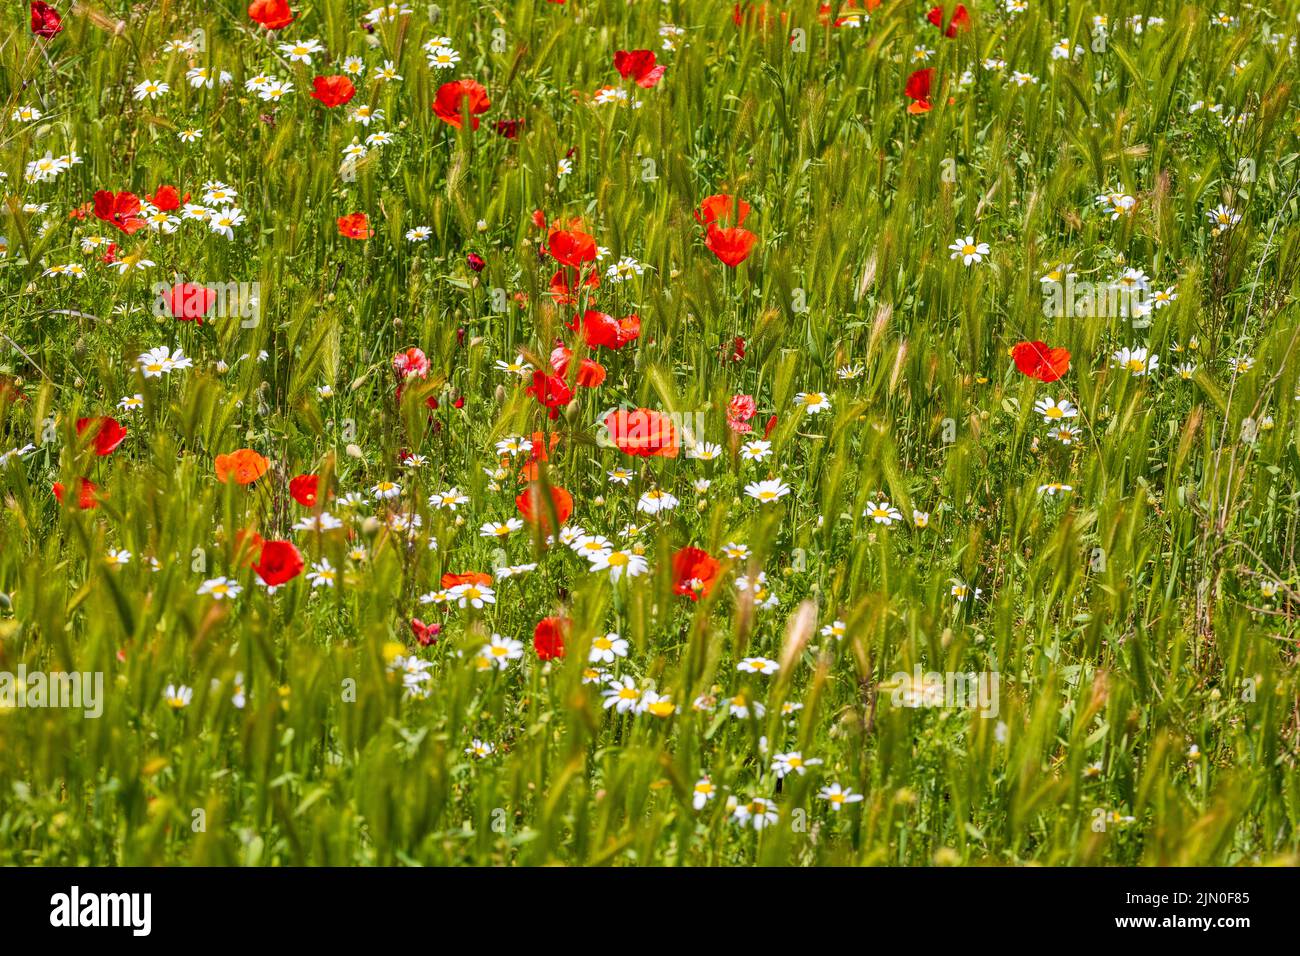 Wild flowers red poppies and white daisies in a field in the Almanzora Valley, Almeria province, Andalucía, Spain Stock Photo